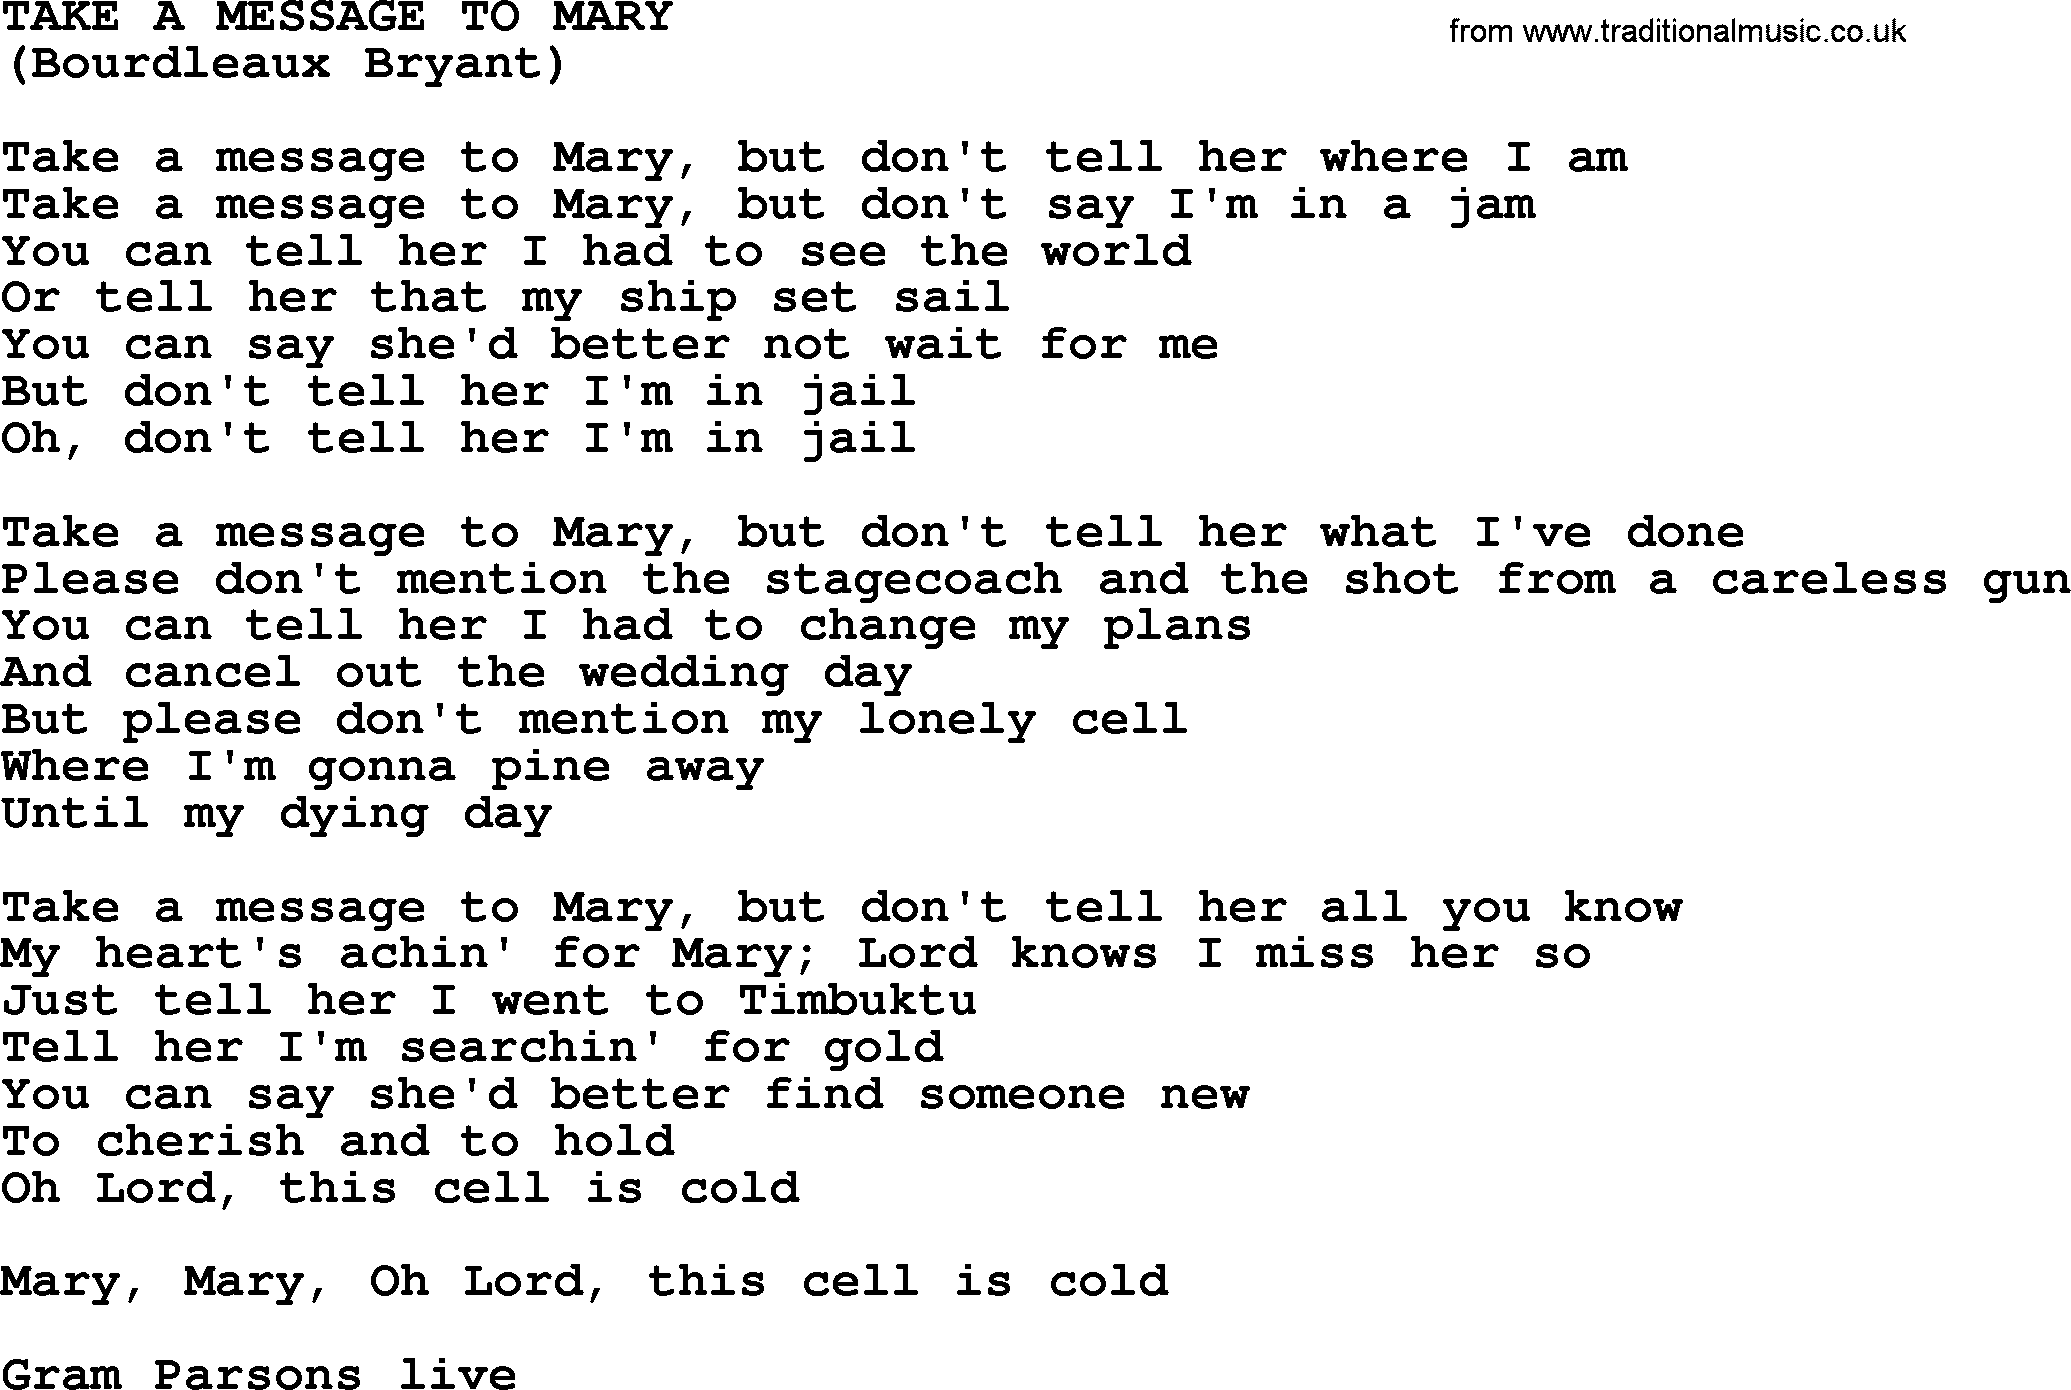 The Byrds song Take A Message To Mary, lyrics